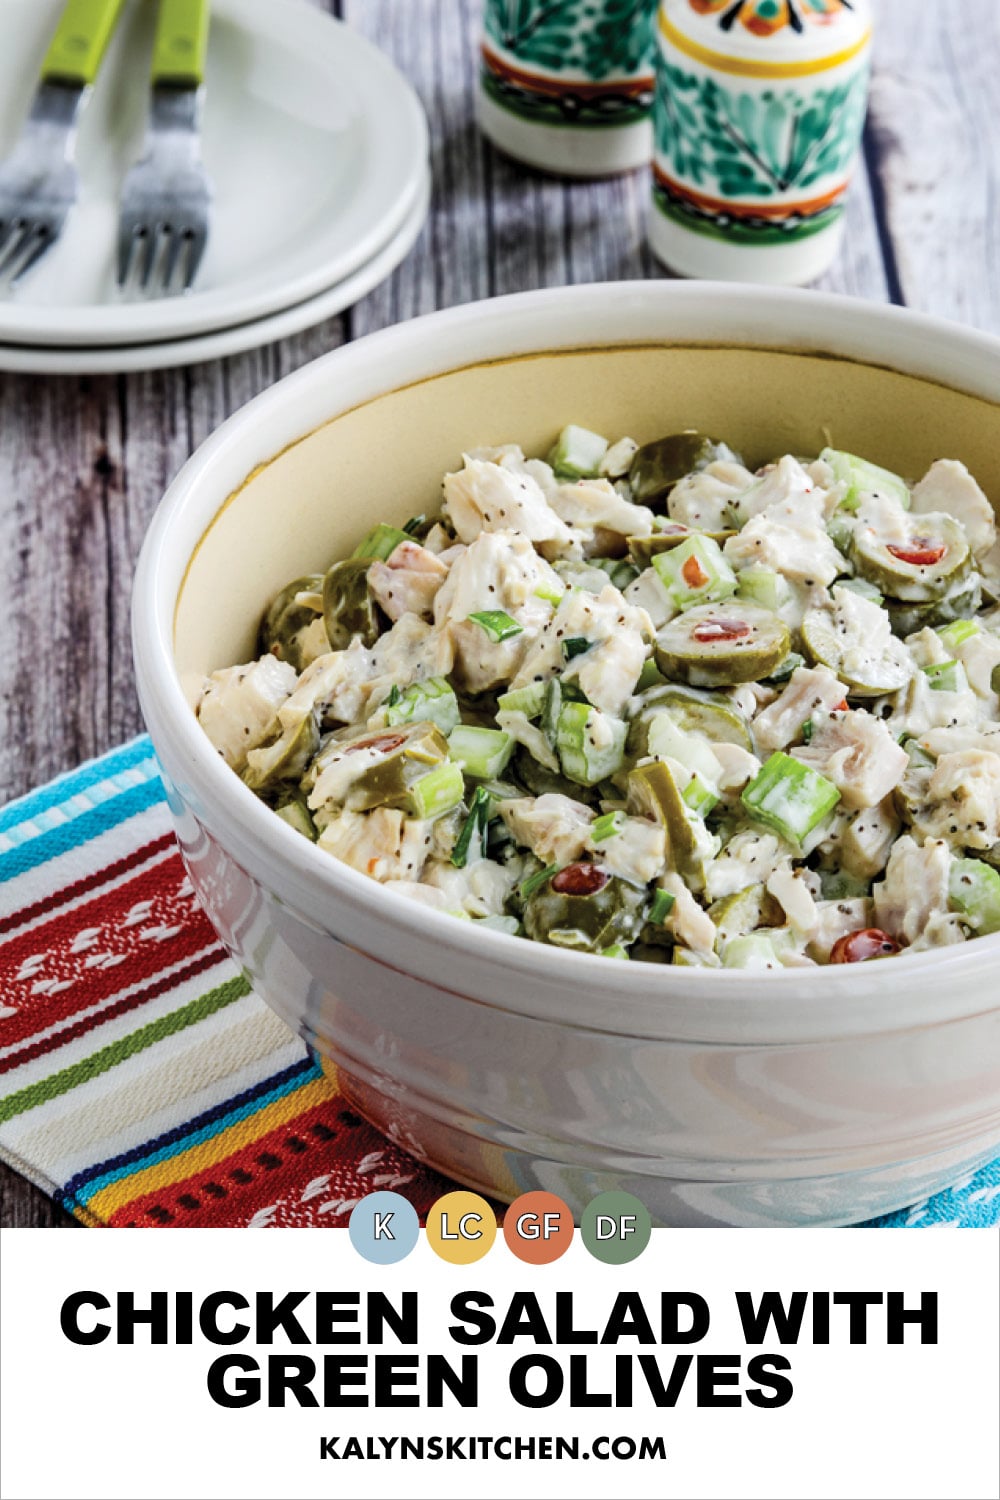 Pinterest image of Chicken Salad with Green Olives